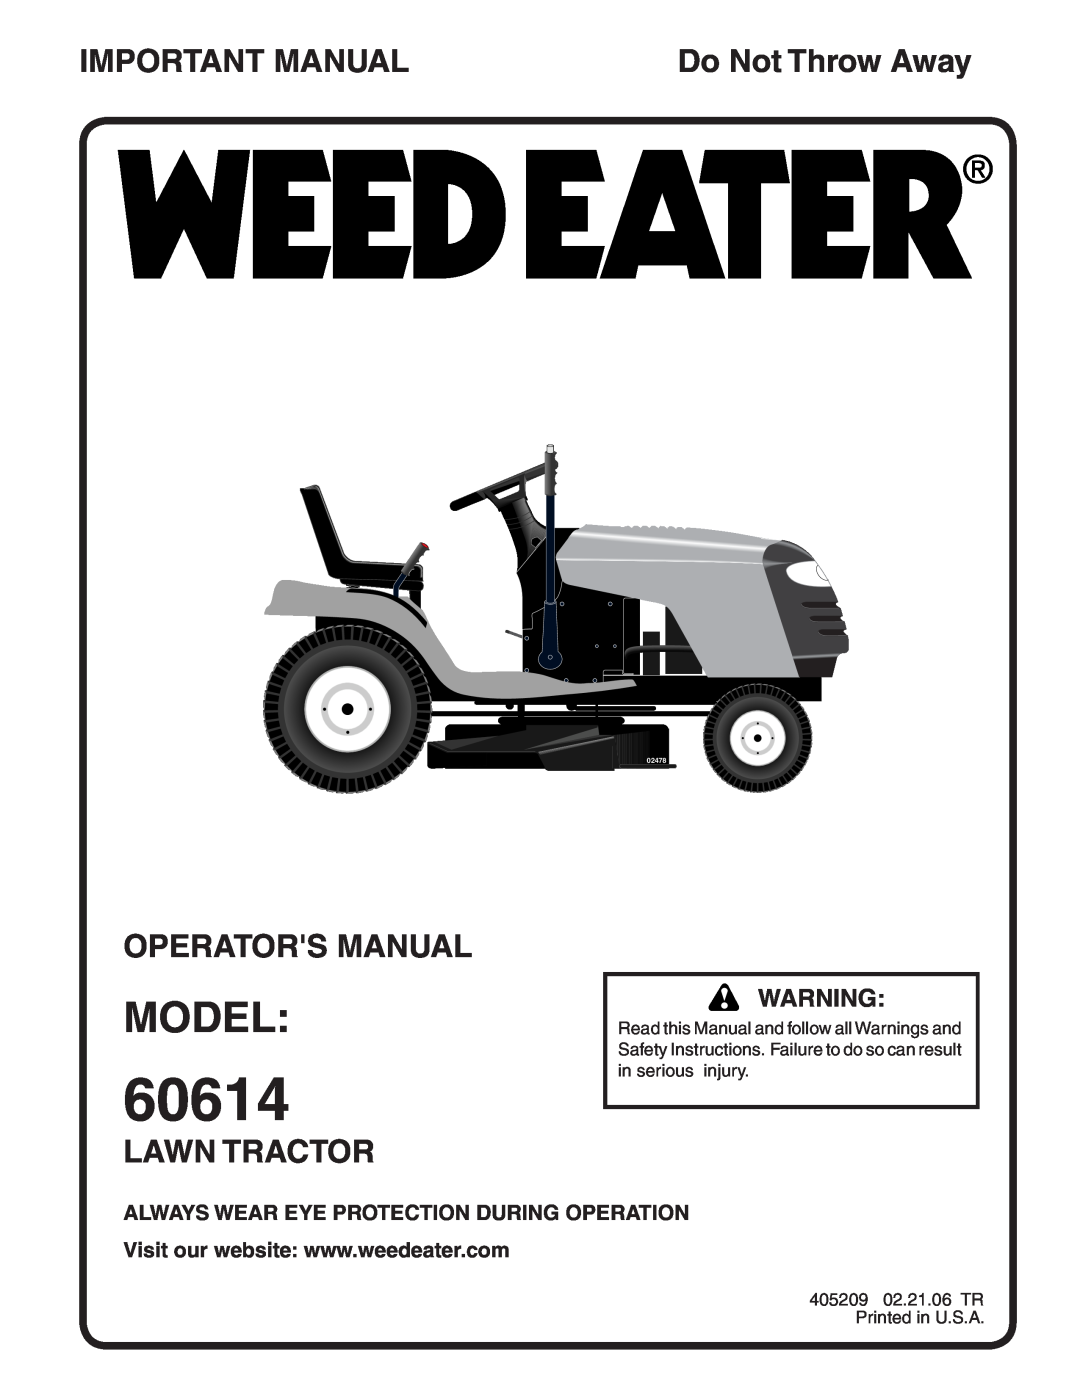 Weed Eater 405209 manual Model, Important Manual, Operators Manual, Lawn Tractor, 60614, Do Not Throw Away, 02478 